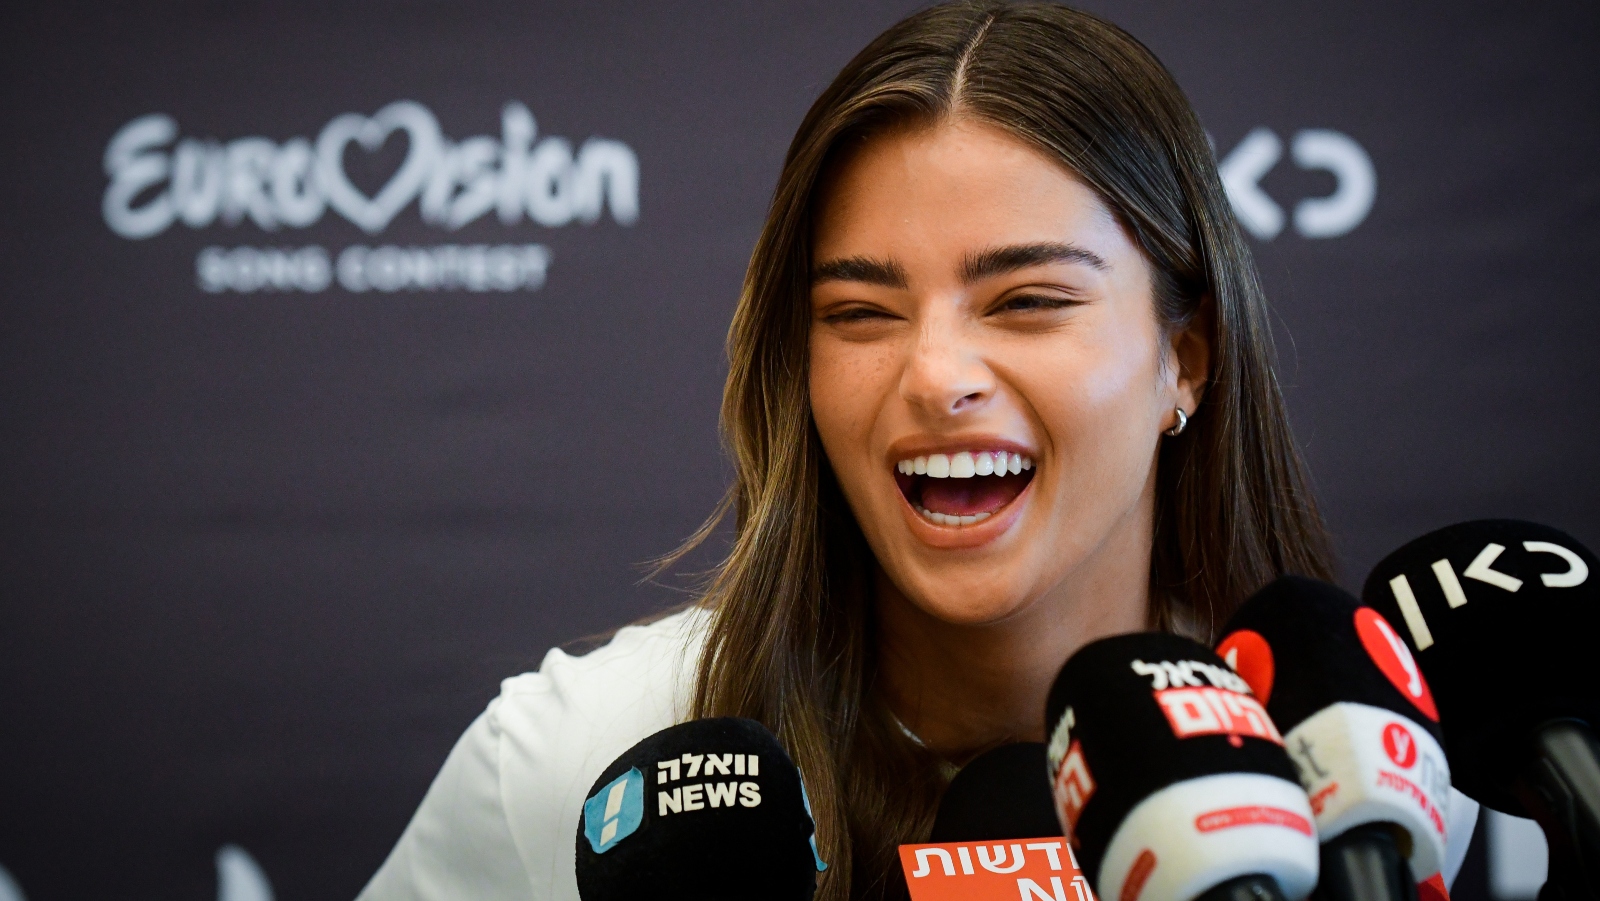 Israeli singer Noa Kirel at a press conference in Tel Aviv on August 10, 2022, announcing her as Israelâ€™s contestant in the 2023 Eurovision Song Contest. Photo by Avshalom Sassoni/Flash90